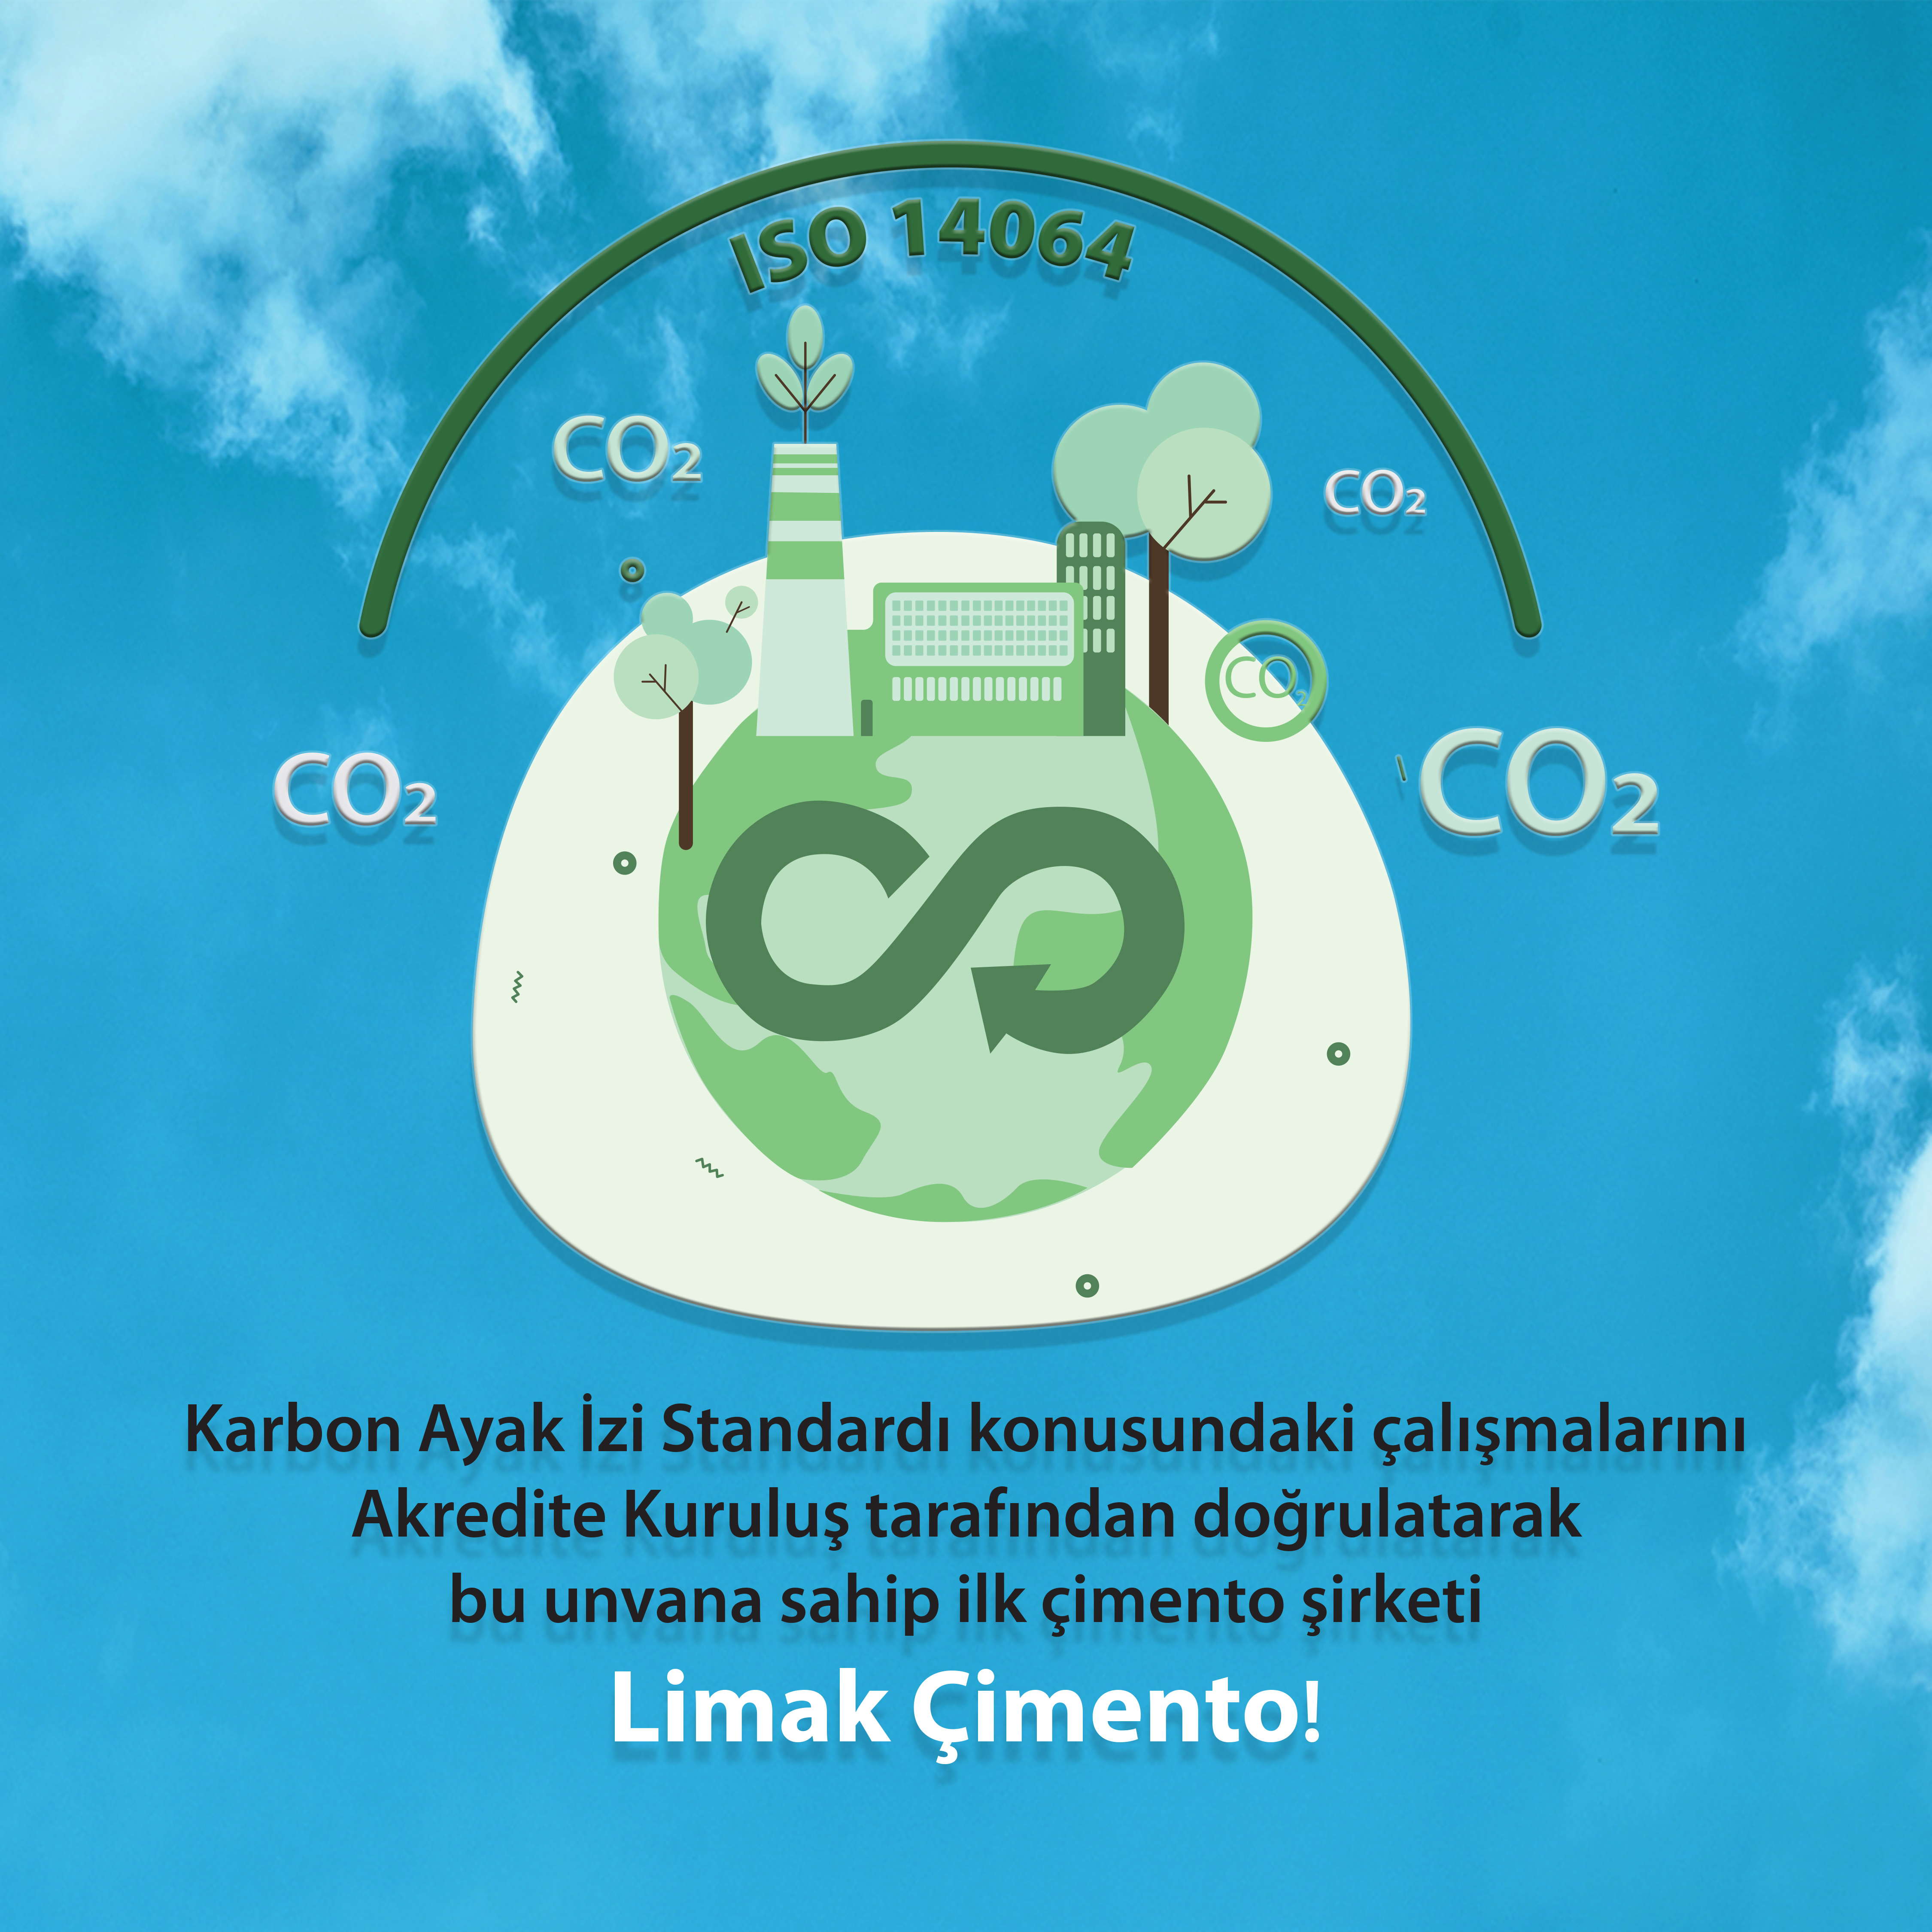 We became the first cement company to have our Carbon Footprint Standard studies verified by an Accredited Organization